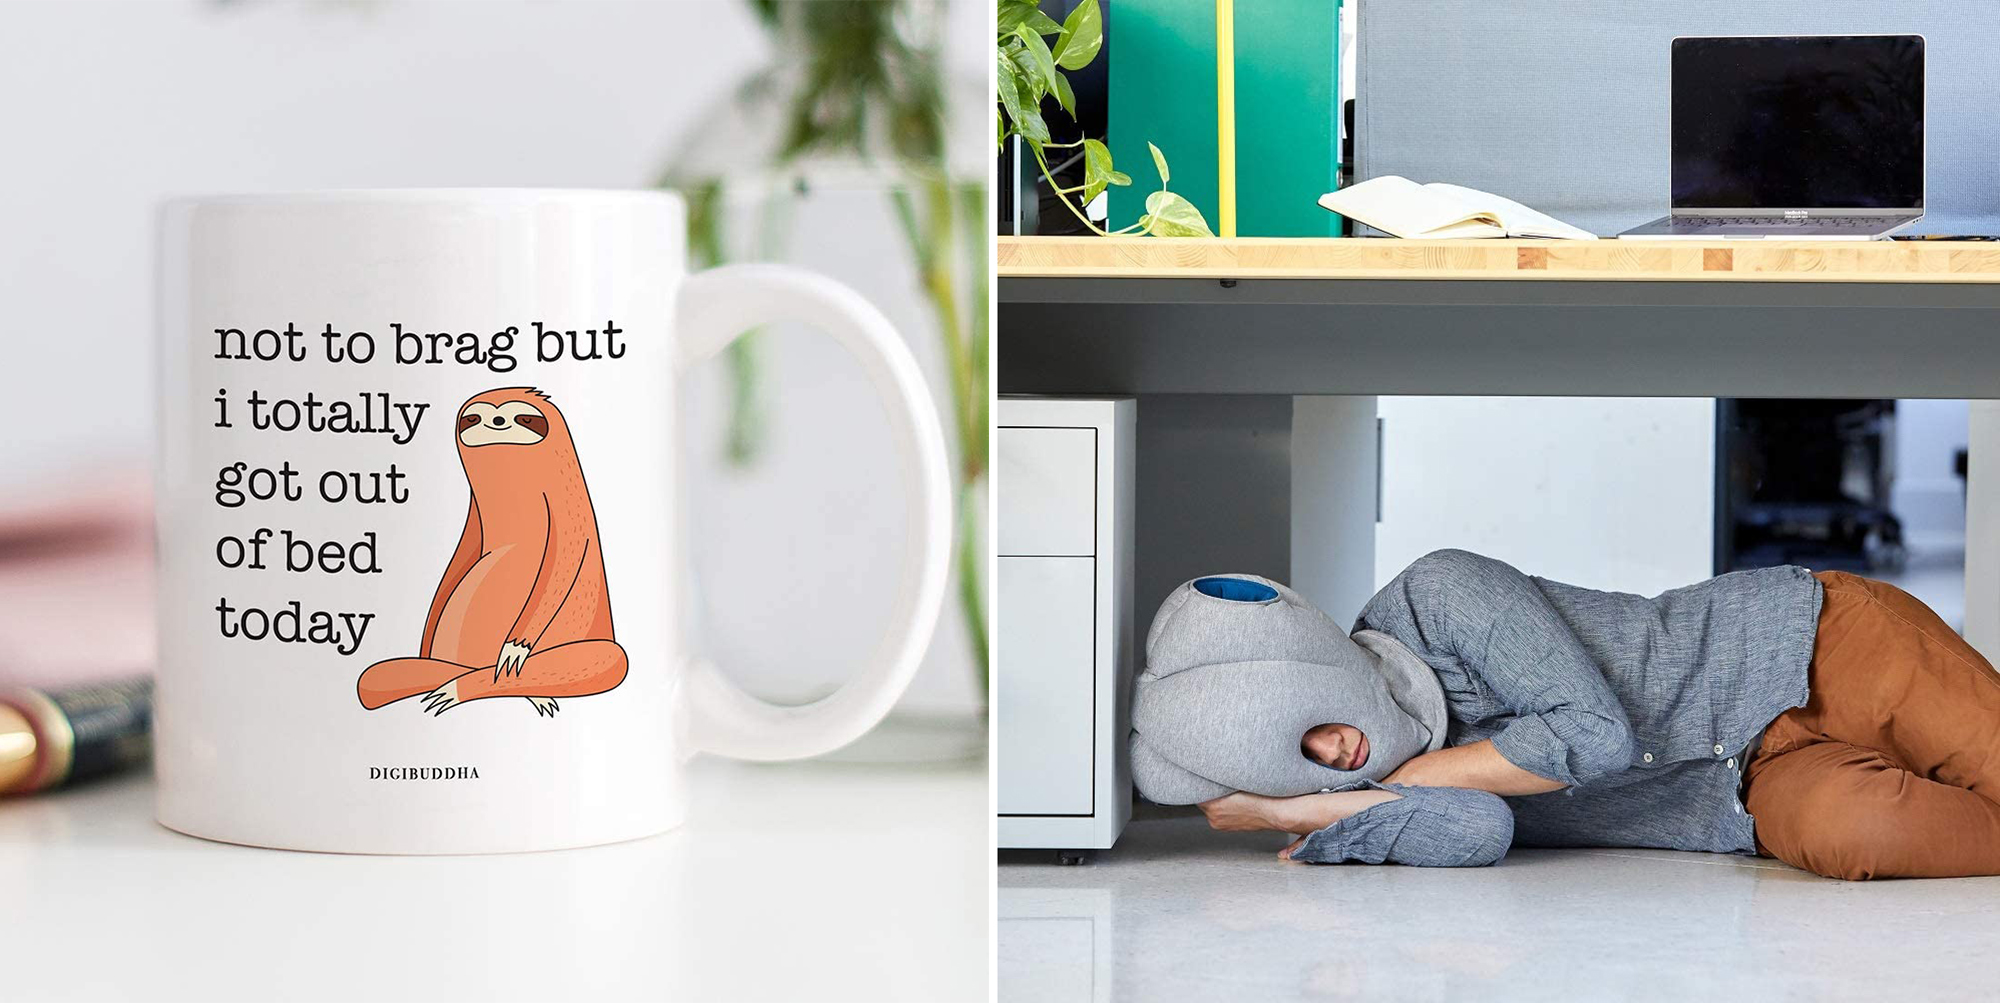 The Best Gifts for People Who Love Sleep